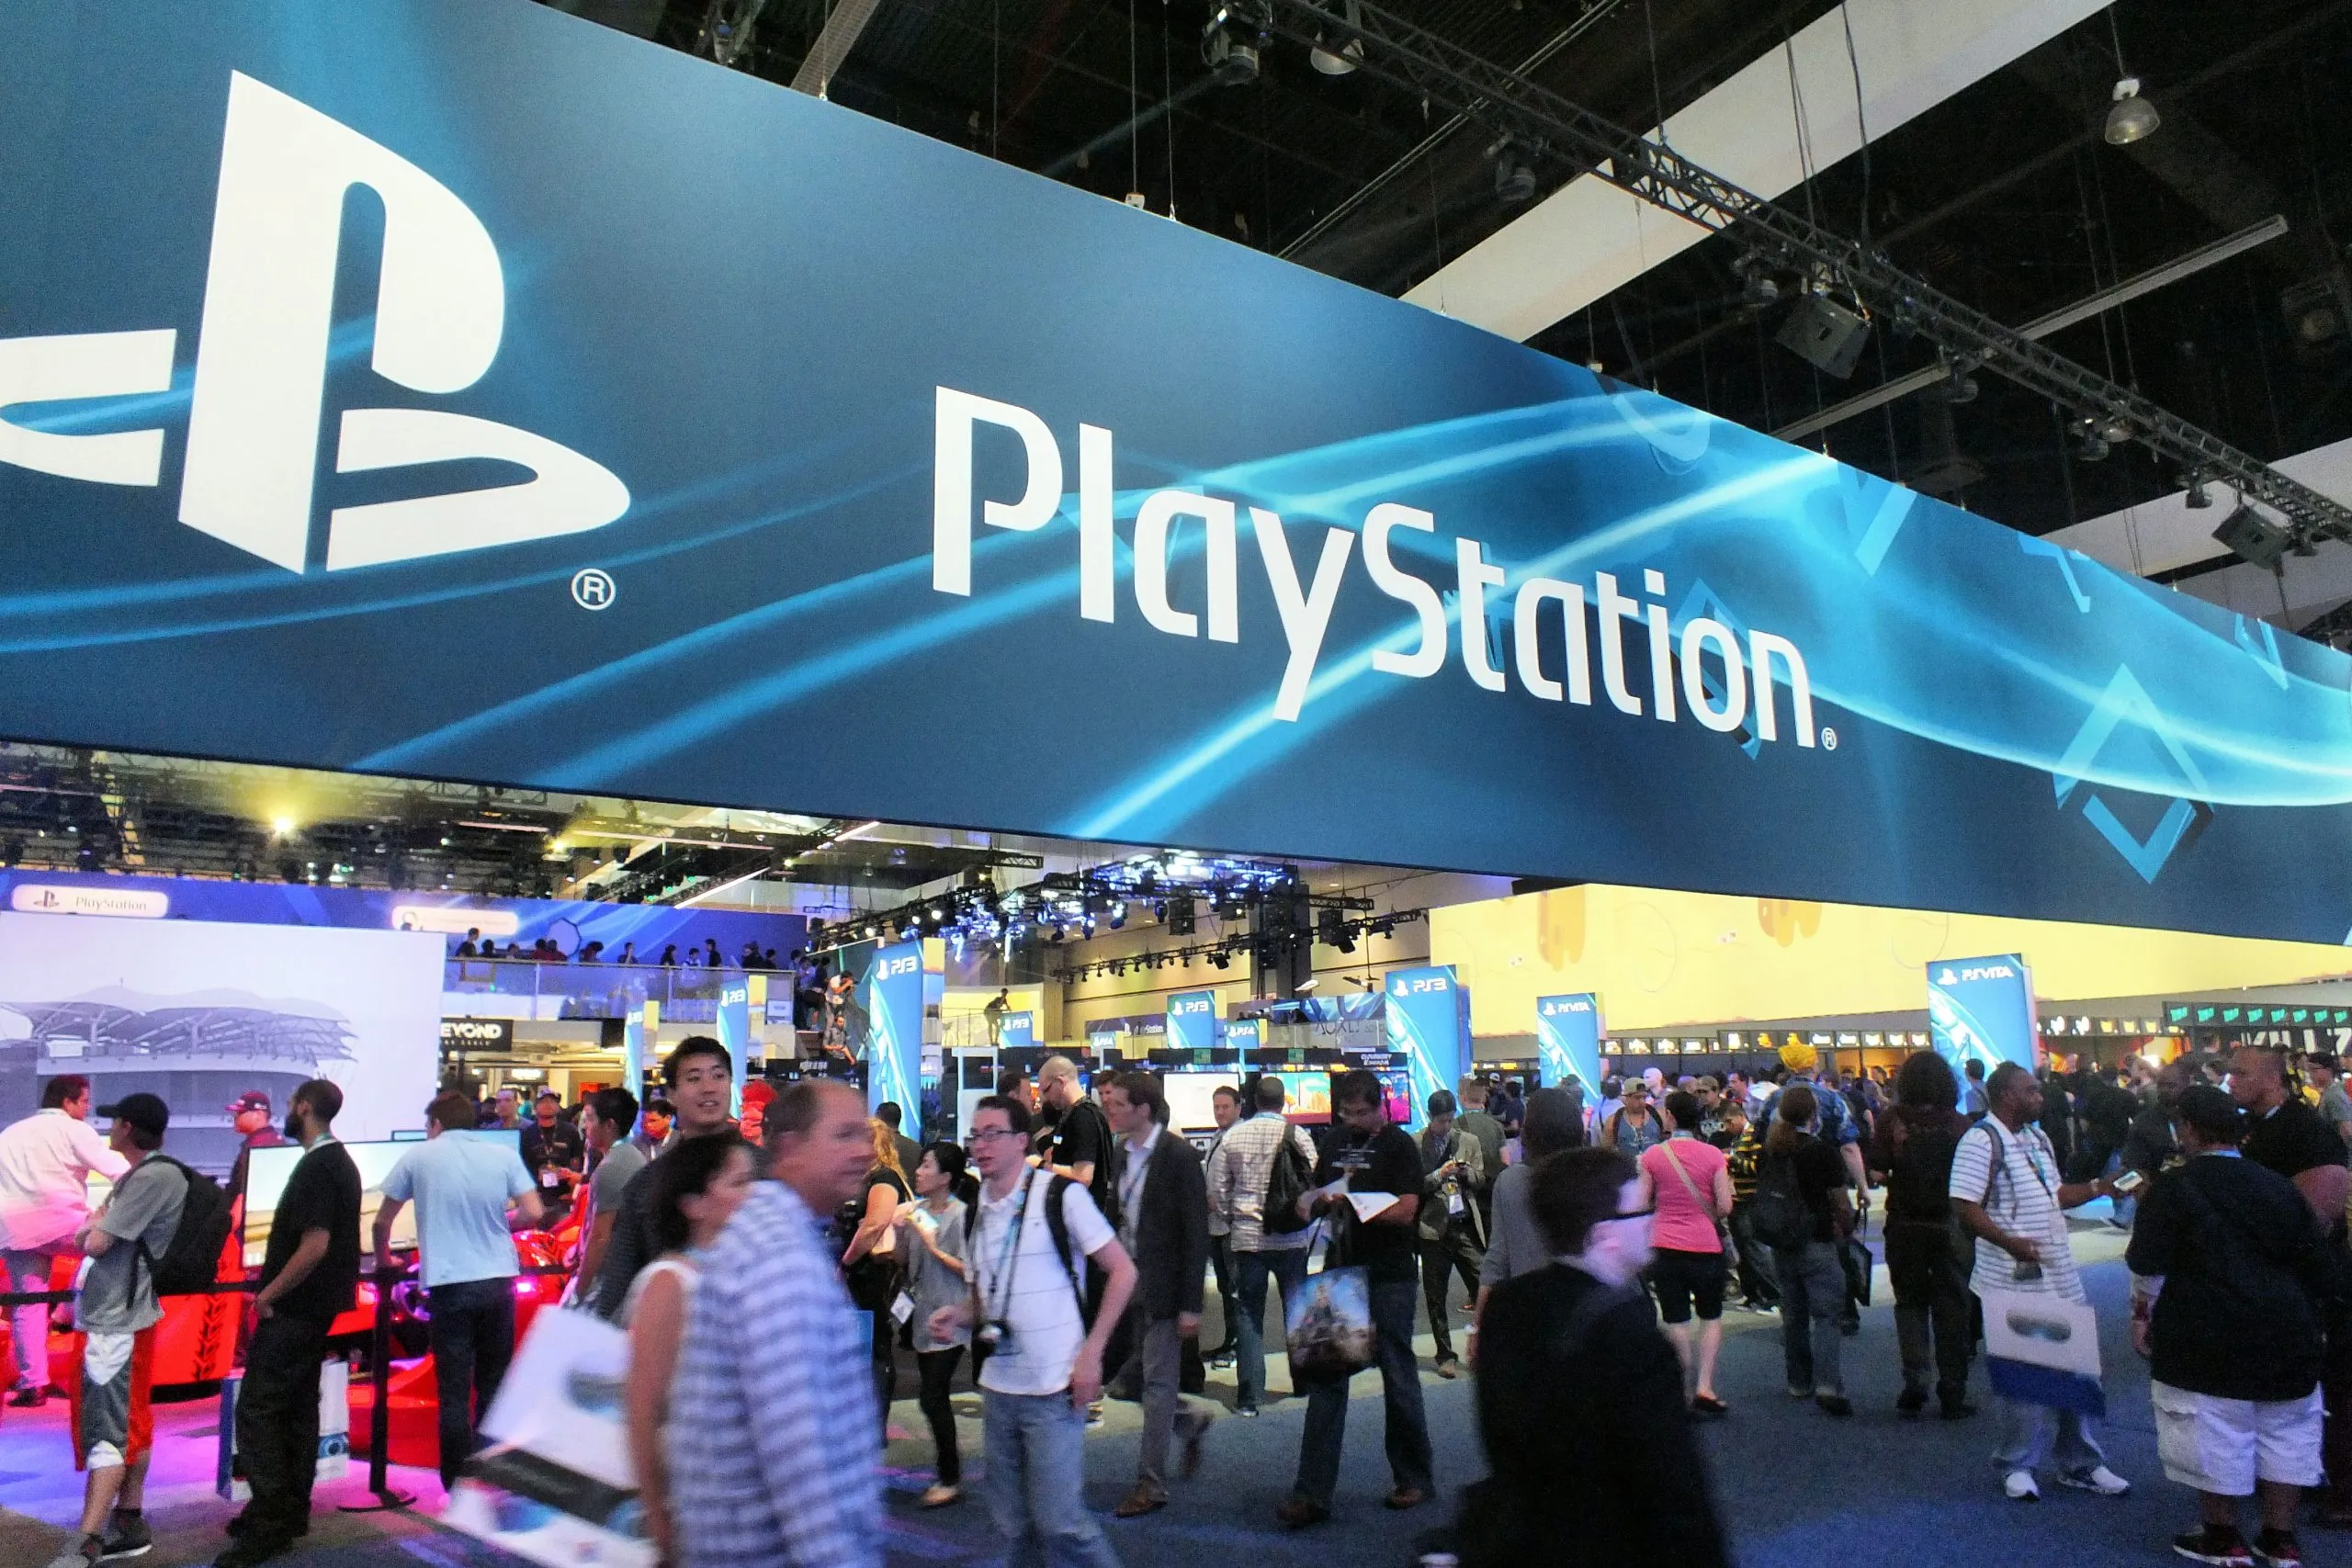 2013 e3 sony playstation booth exterior 9096902861 scaled